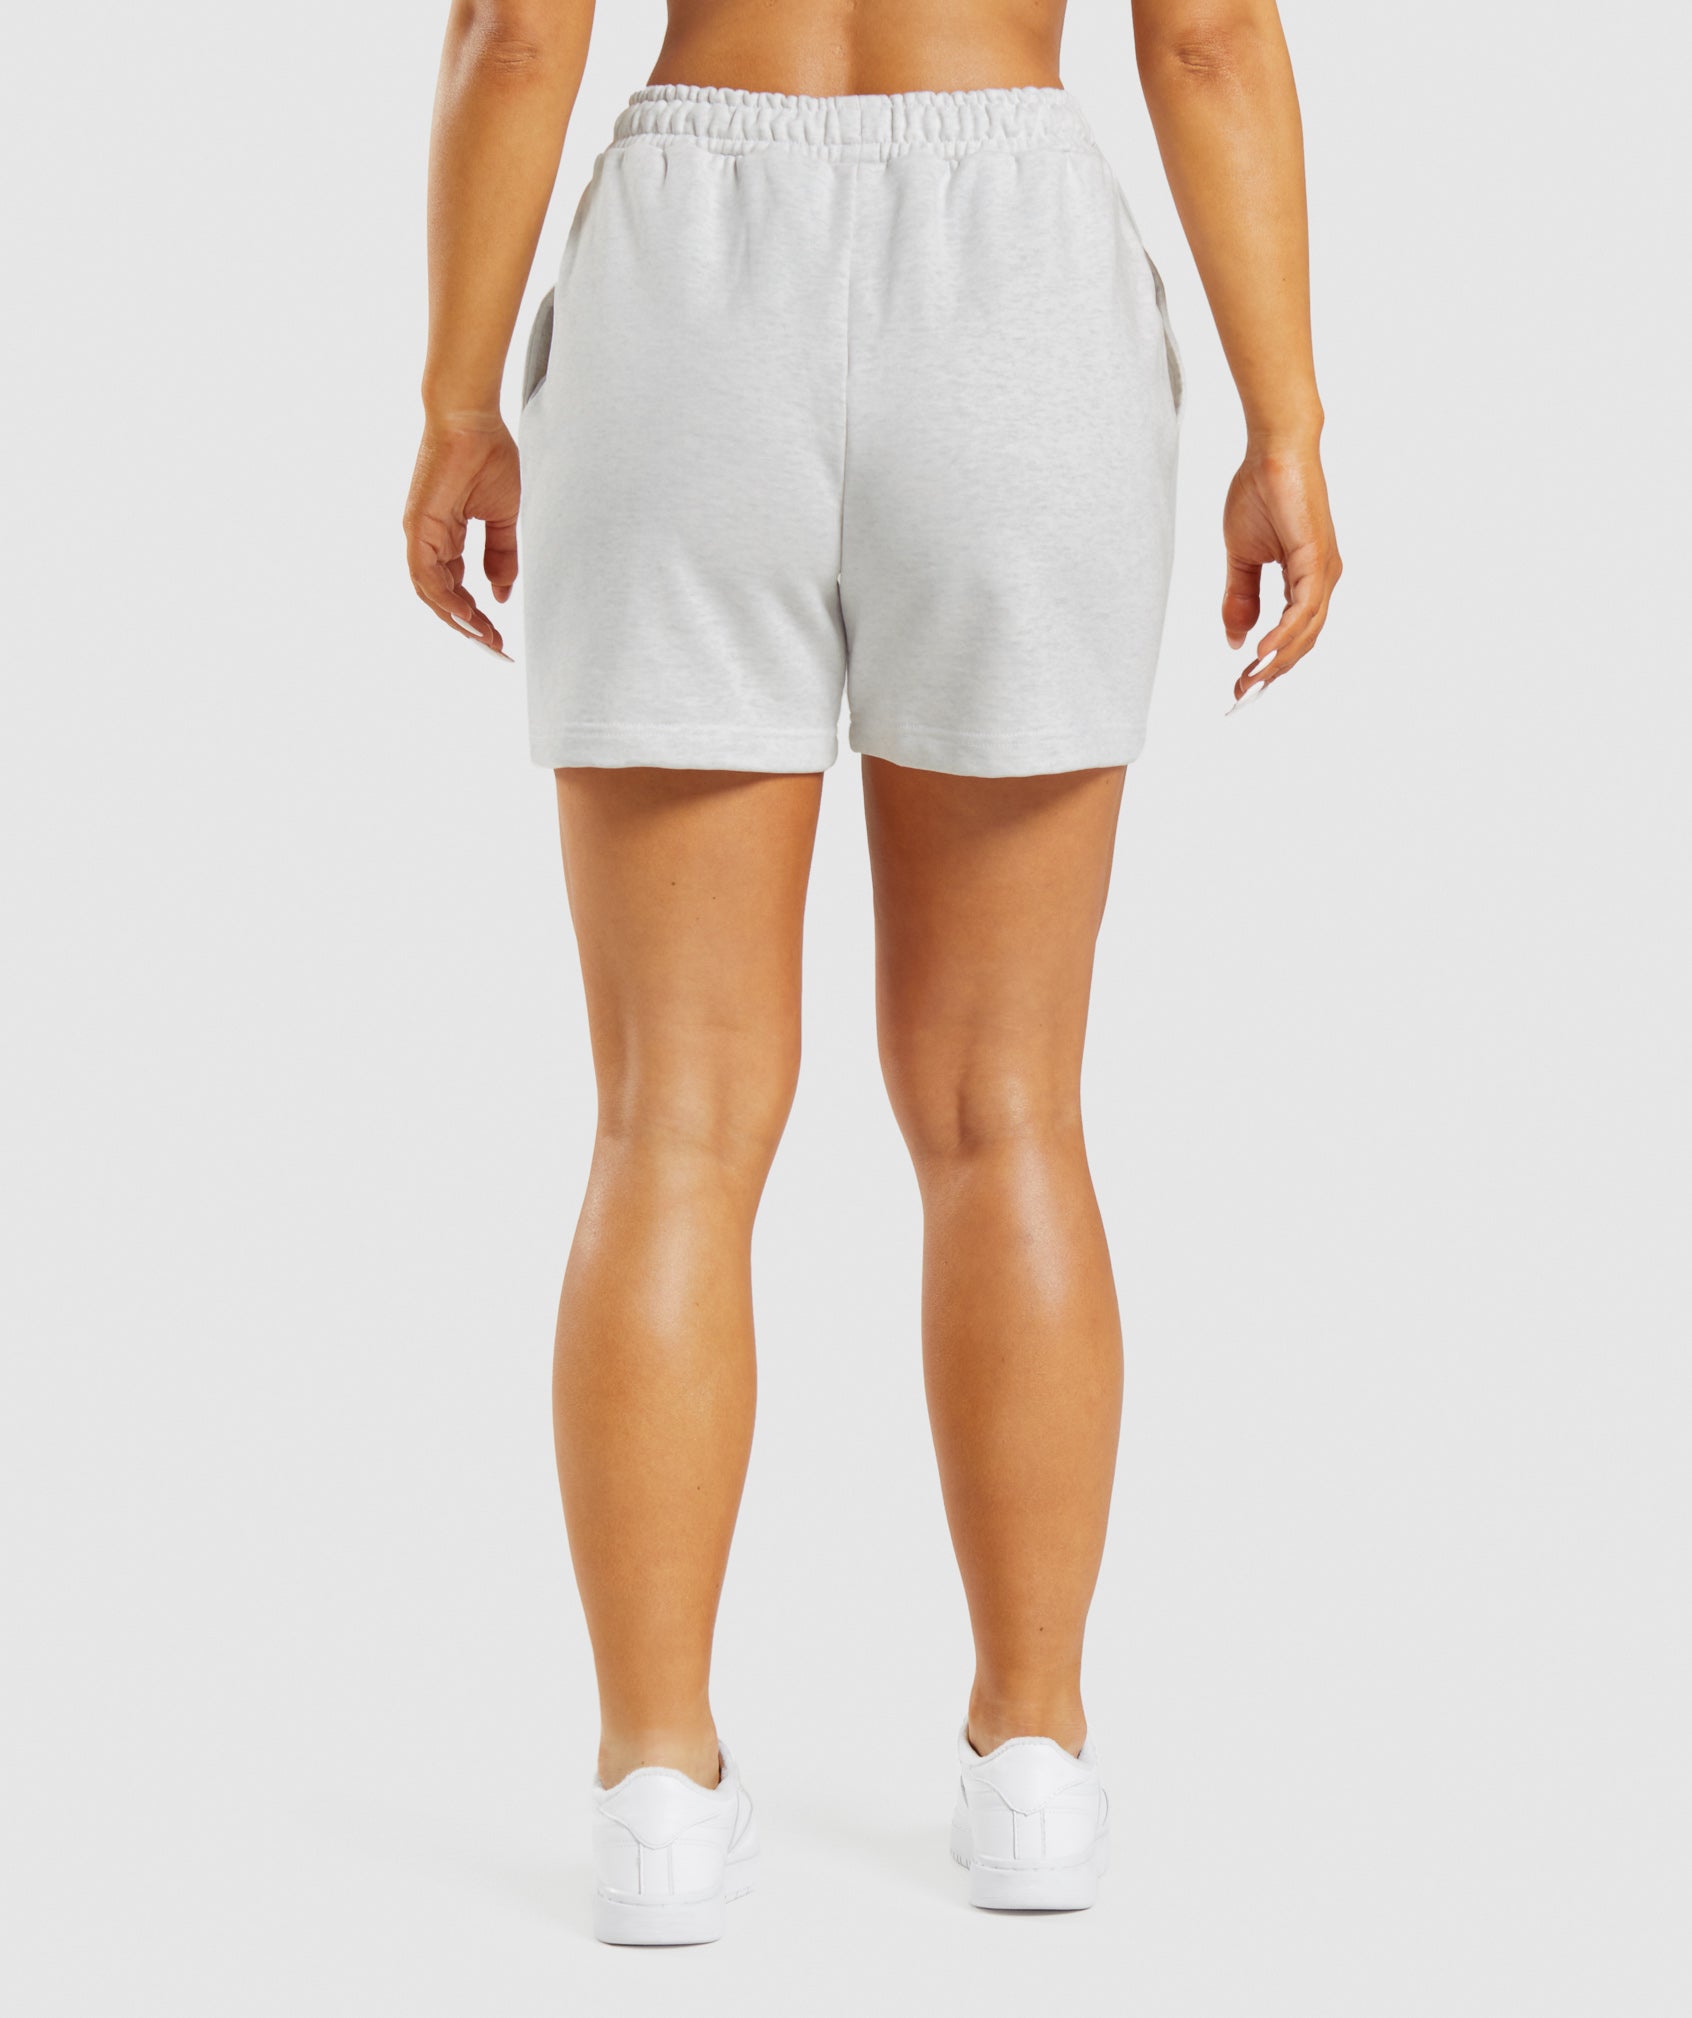 Rest Day Sweats Shorts in Cloud Marl - view 2